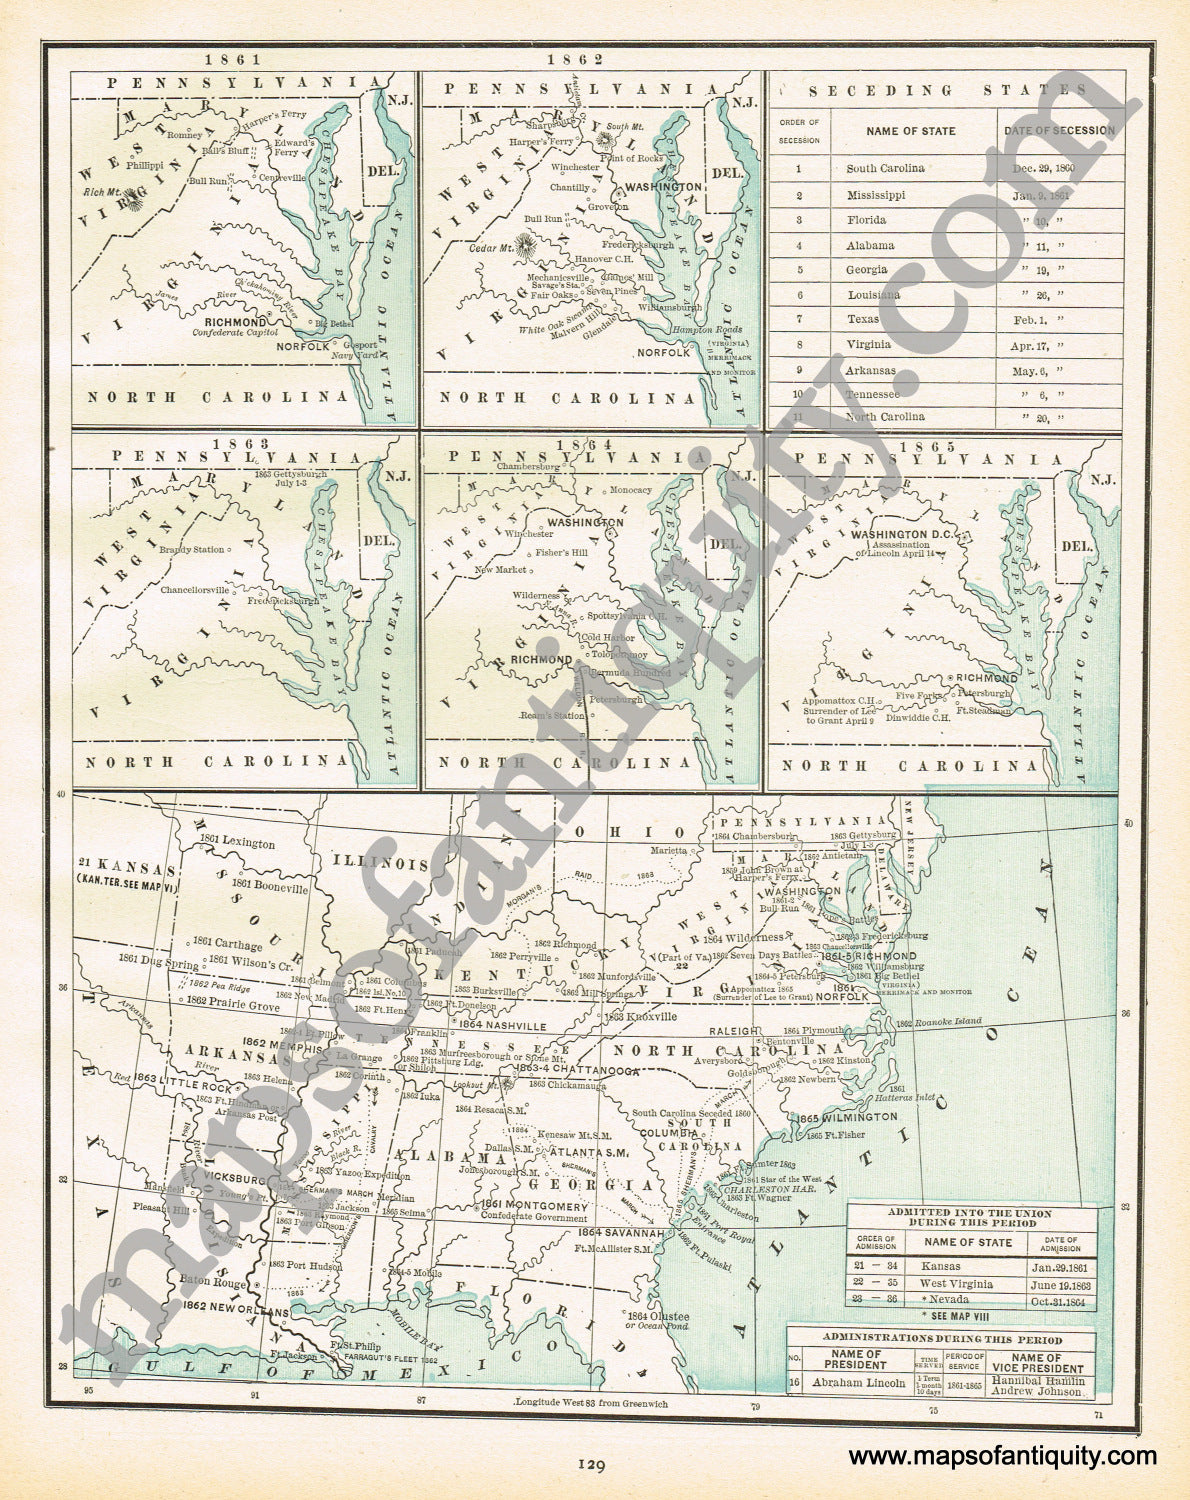 Antique-Printed-Color-Map-Secessions-of-the-U.S.-United-States--1894-Cram-Maps-Of-Antiquity